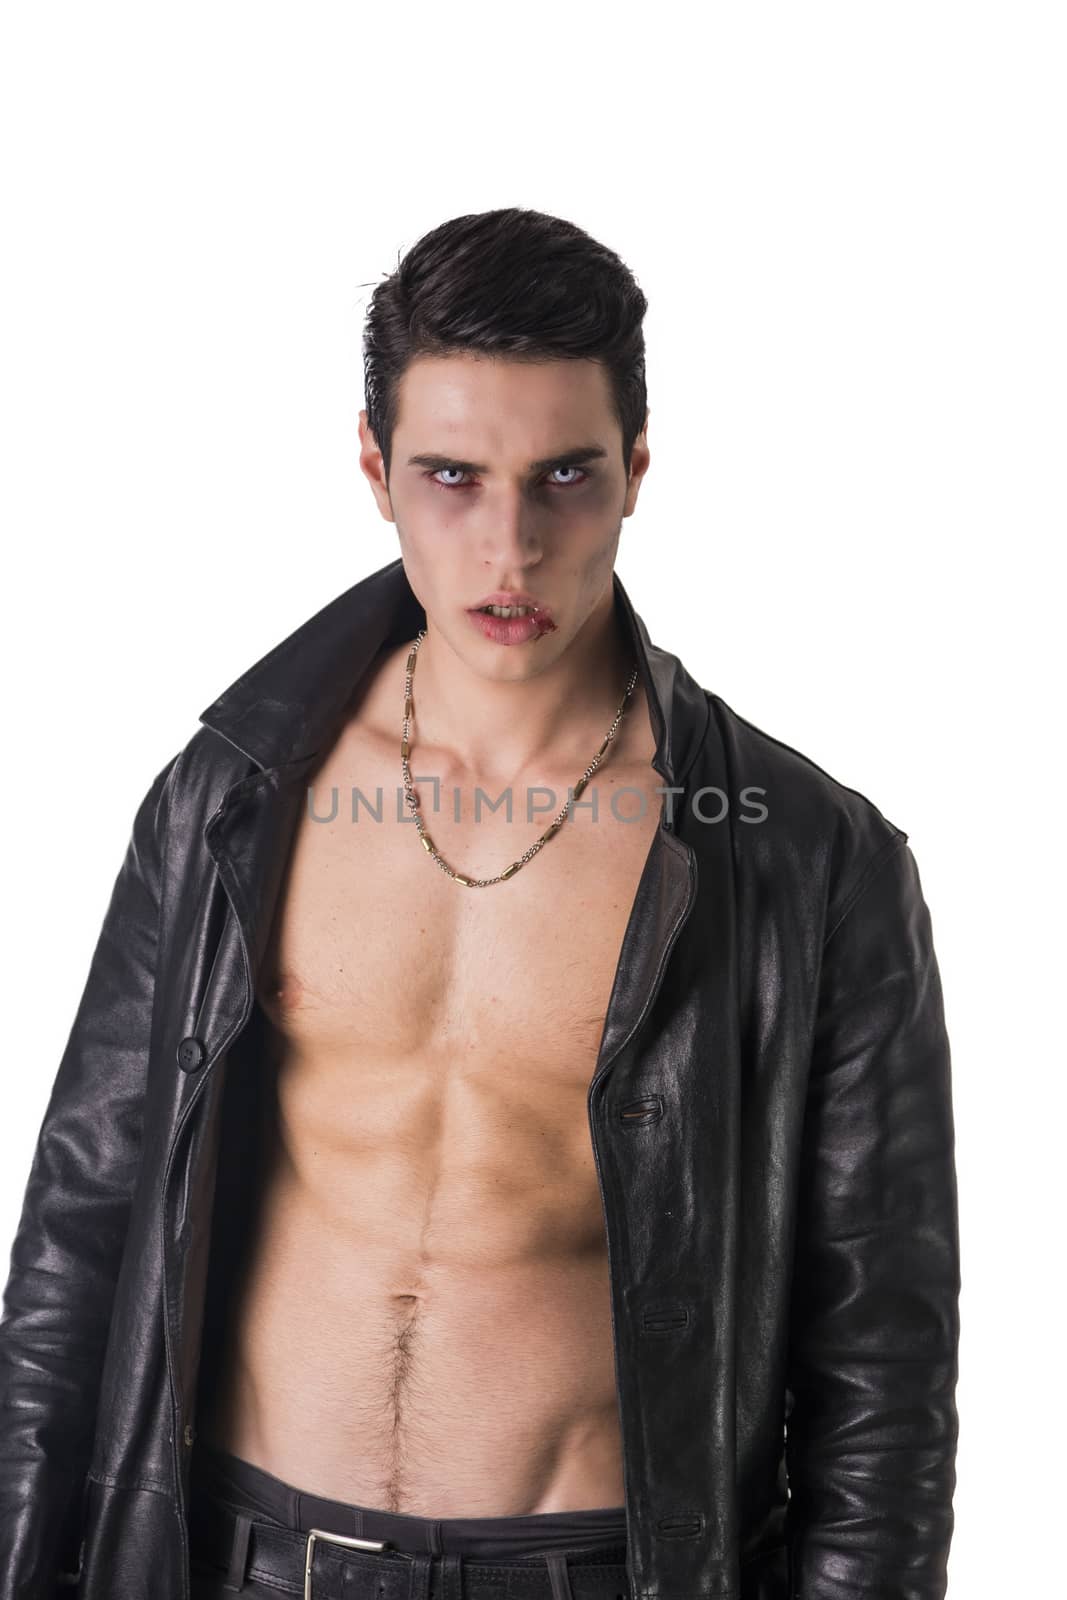 Portrait of a Young Vampire Man in an Open Black Leather Jacket, Showing his Chest and Abs, Looking at the Camera, Isolated on a White Background.